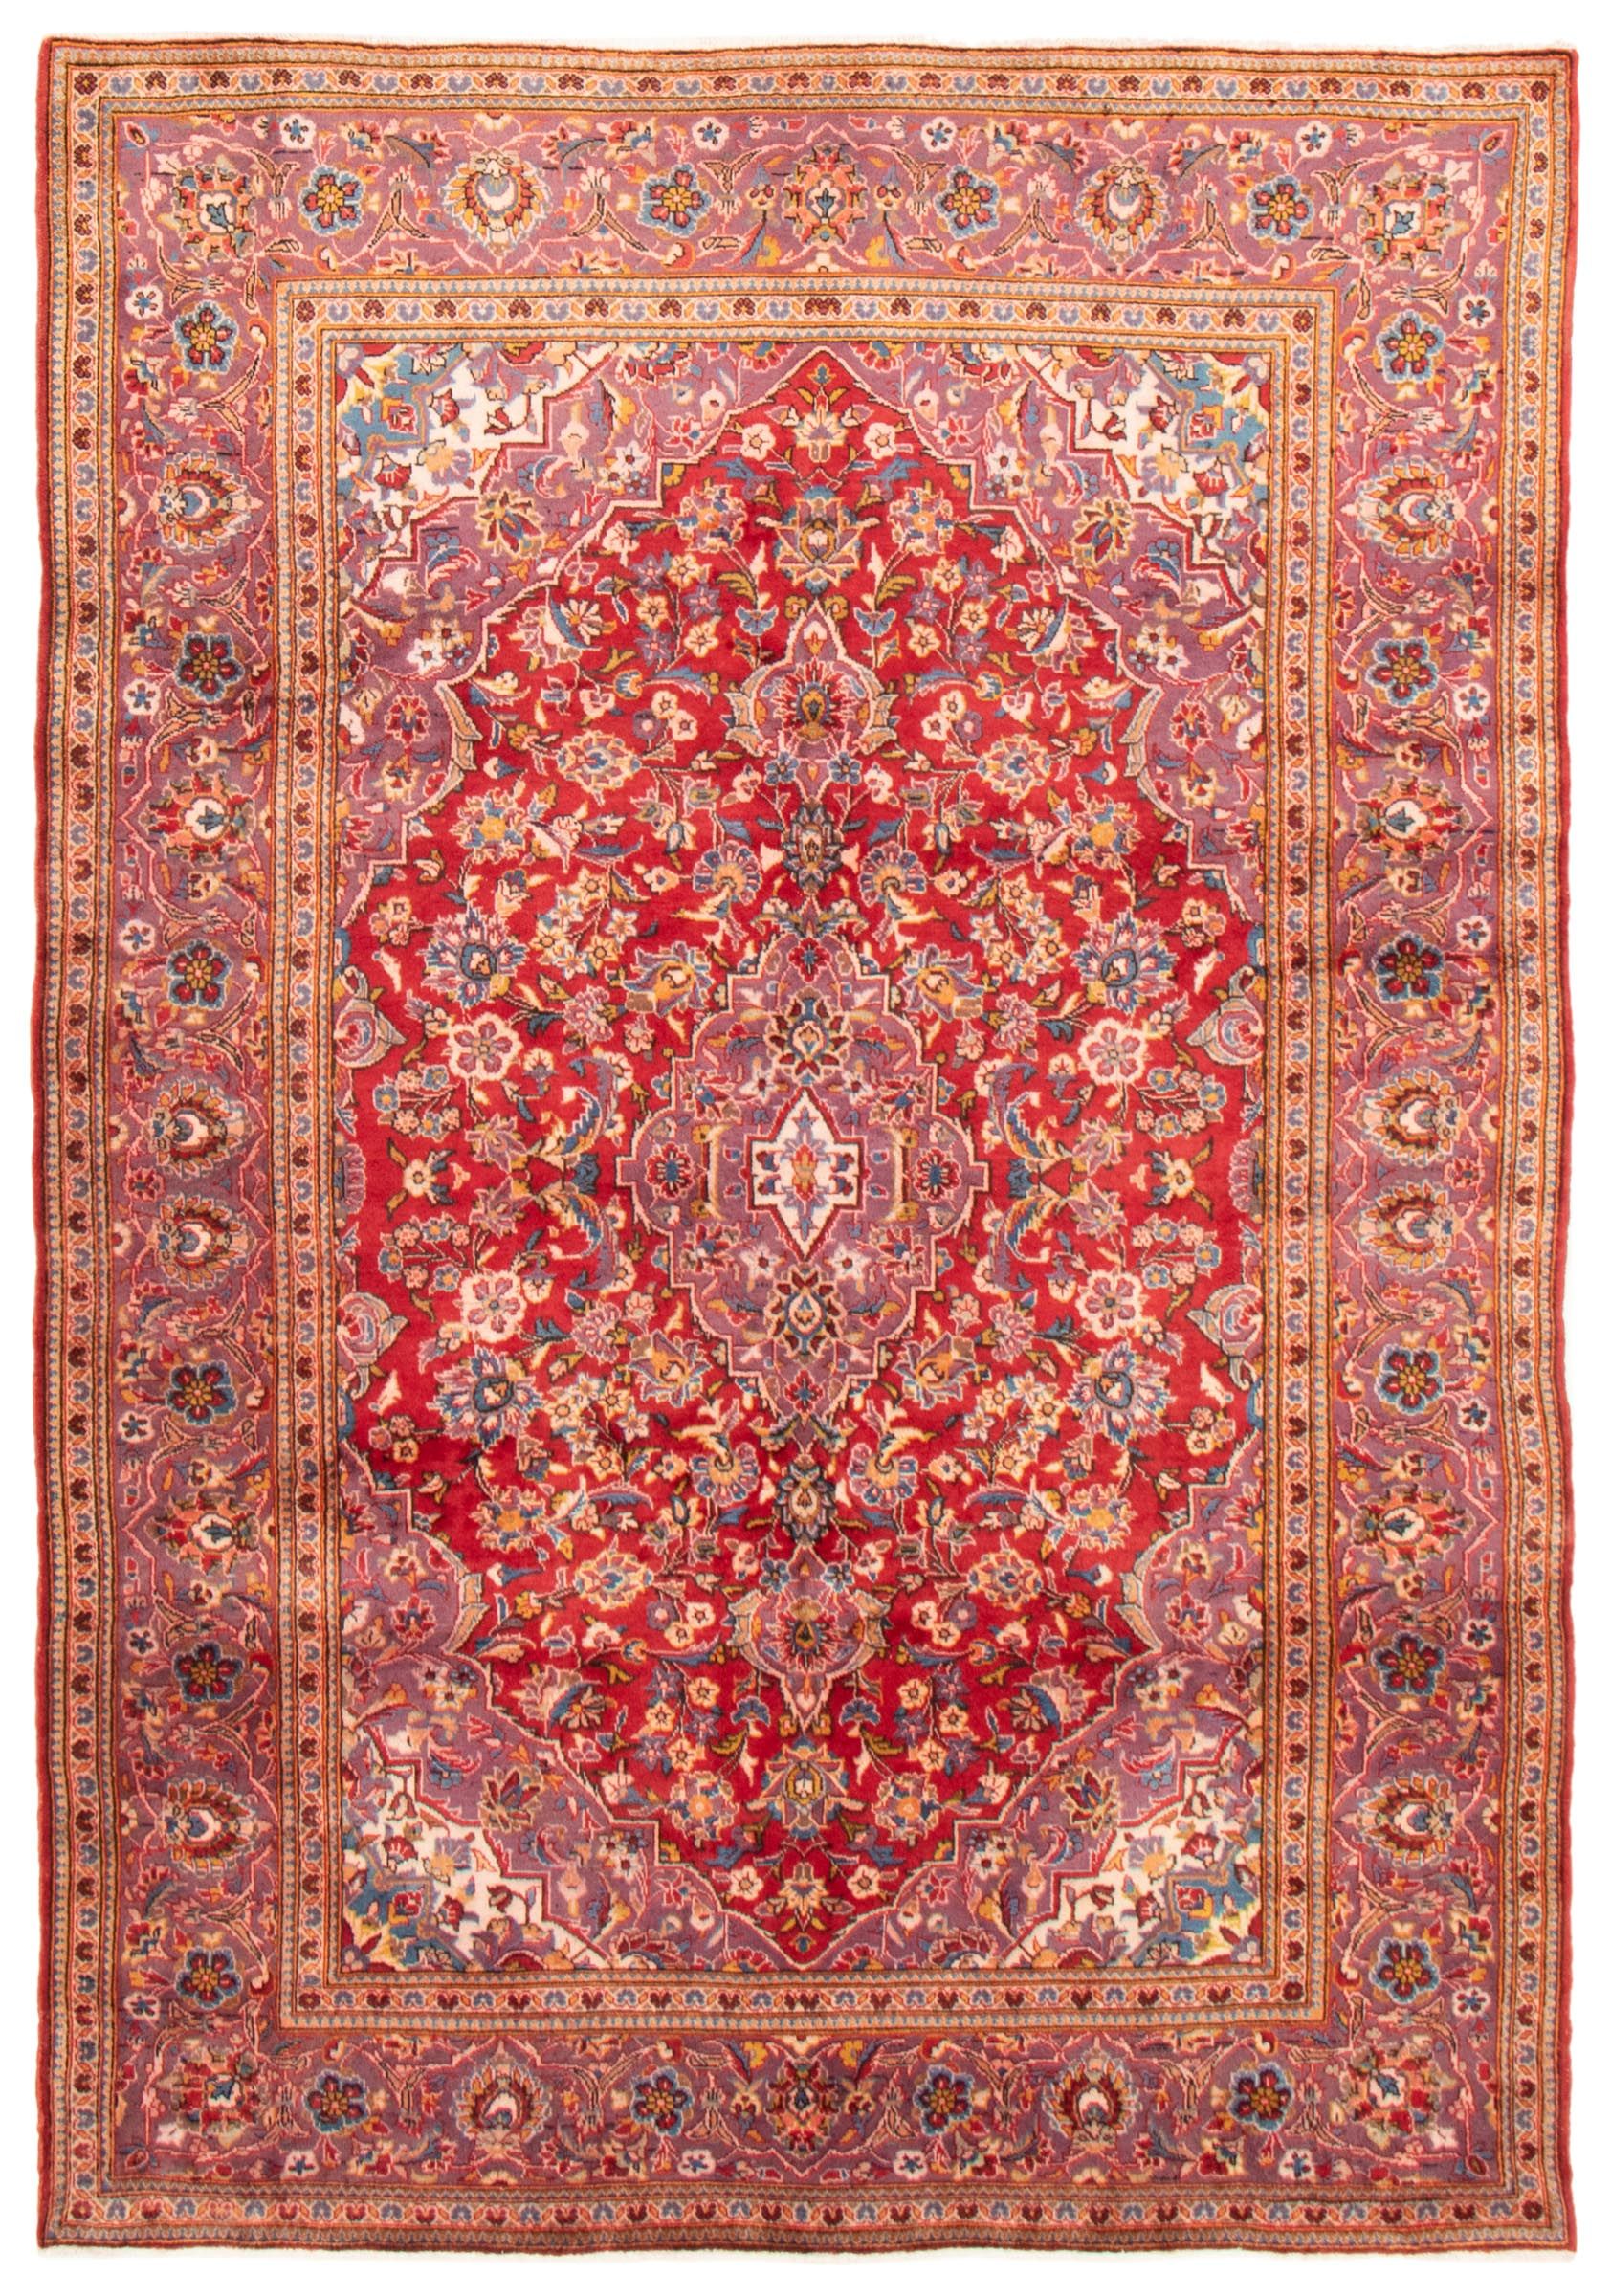 360207 Hand-Knotted Wool Rug eCarpet Gallery Large Area Rug for Living Room Bedroom Finest Khal Mohammadi Bordered Red Rug 6'9 x 9'9